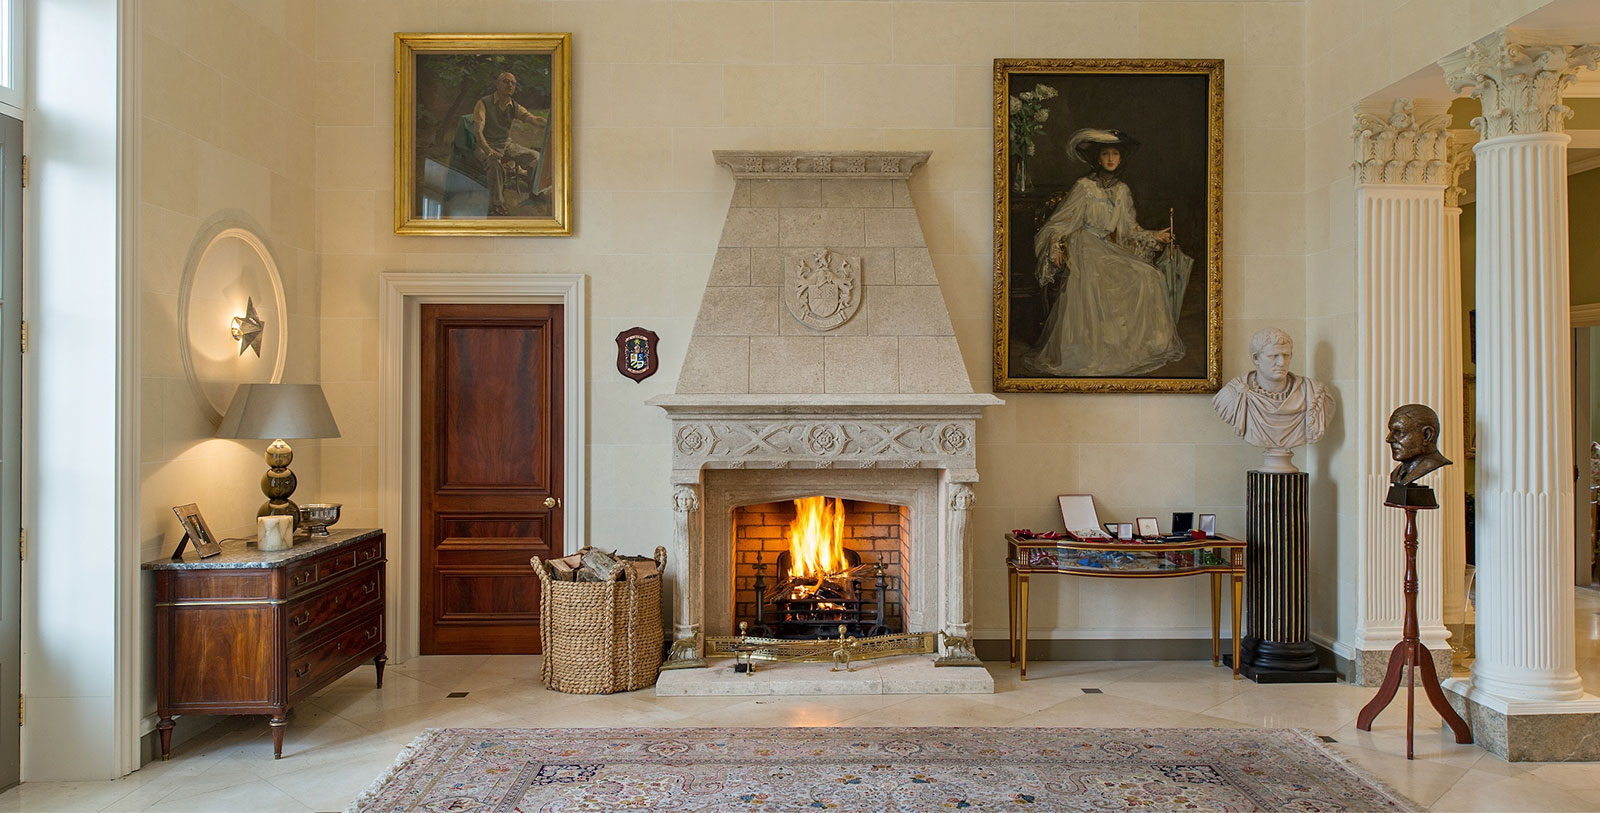 Explore County Kildare and visit the famous Castletown House a few miles away.